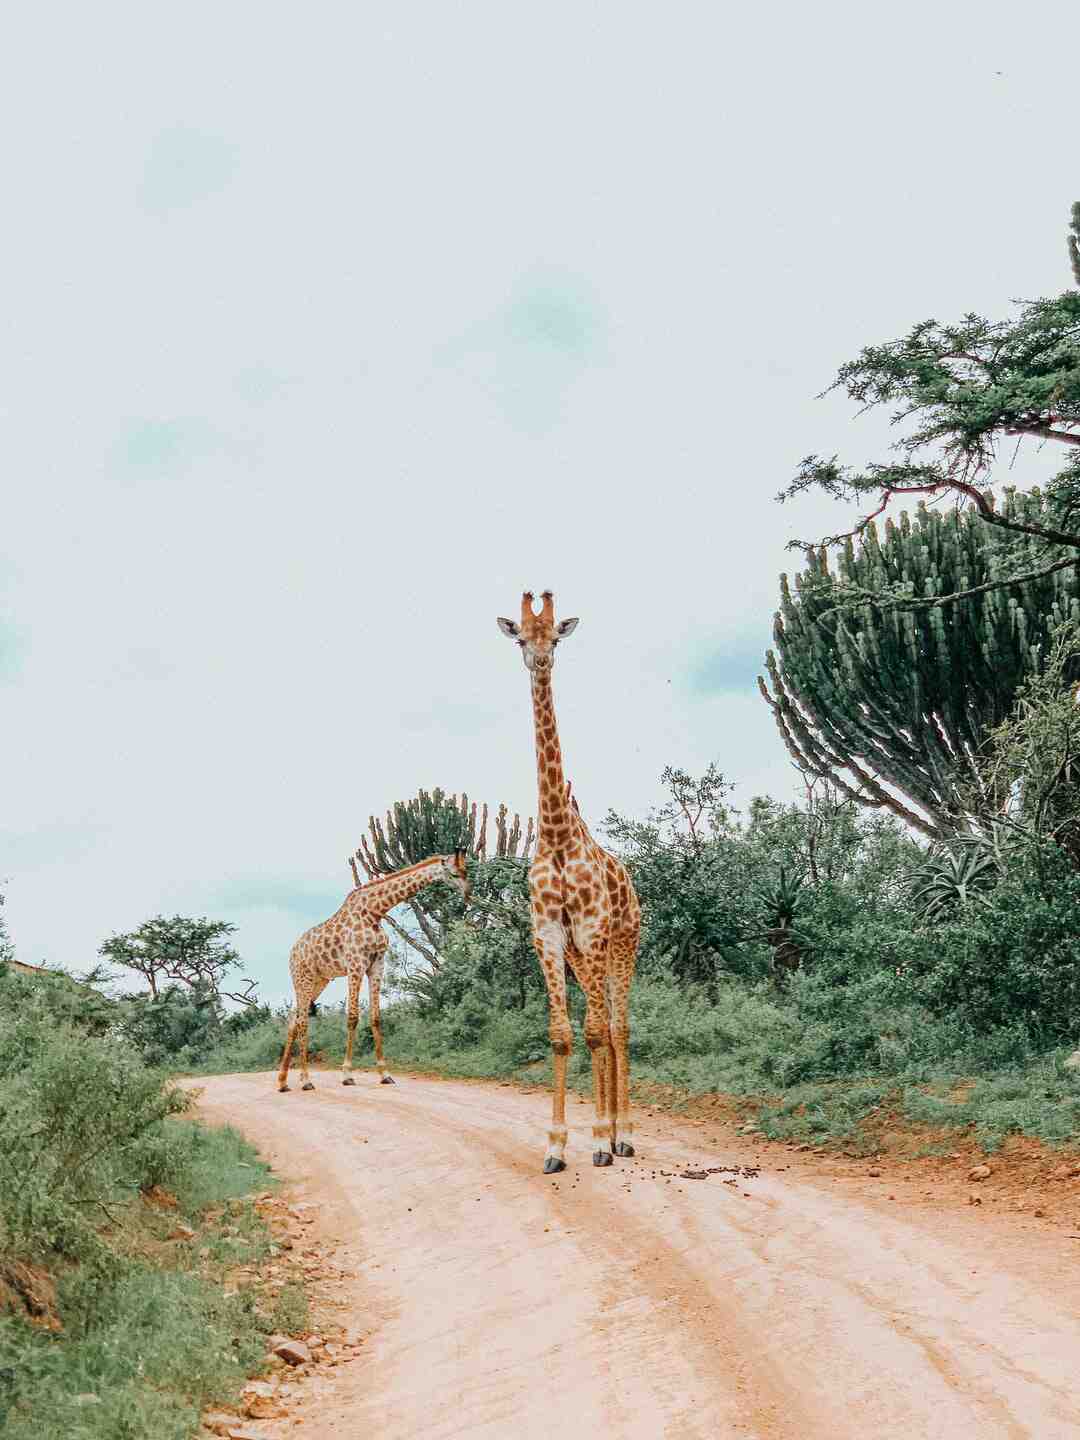 Where to go on an authentic safari?